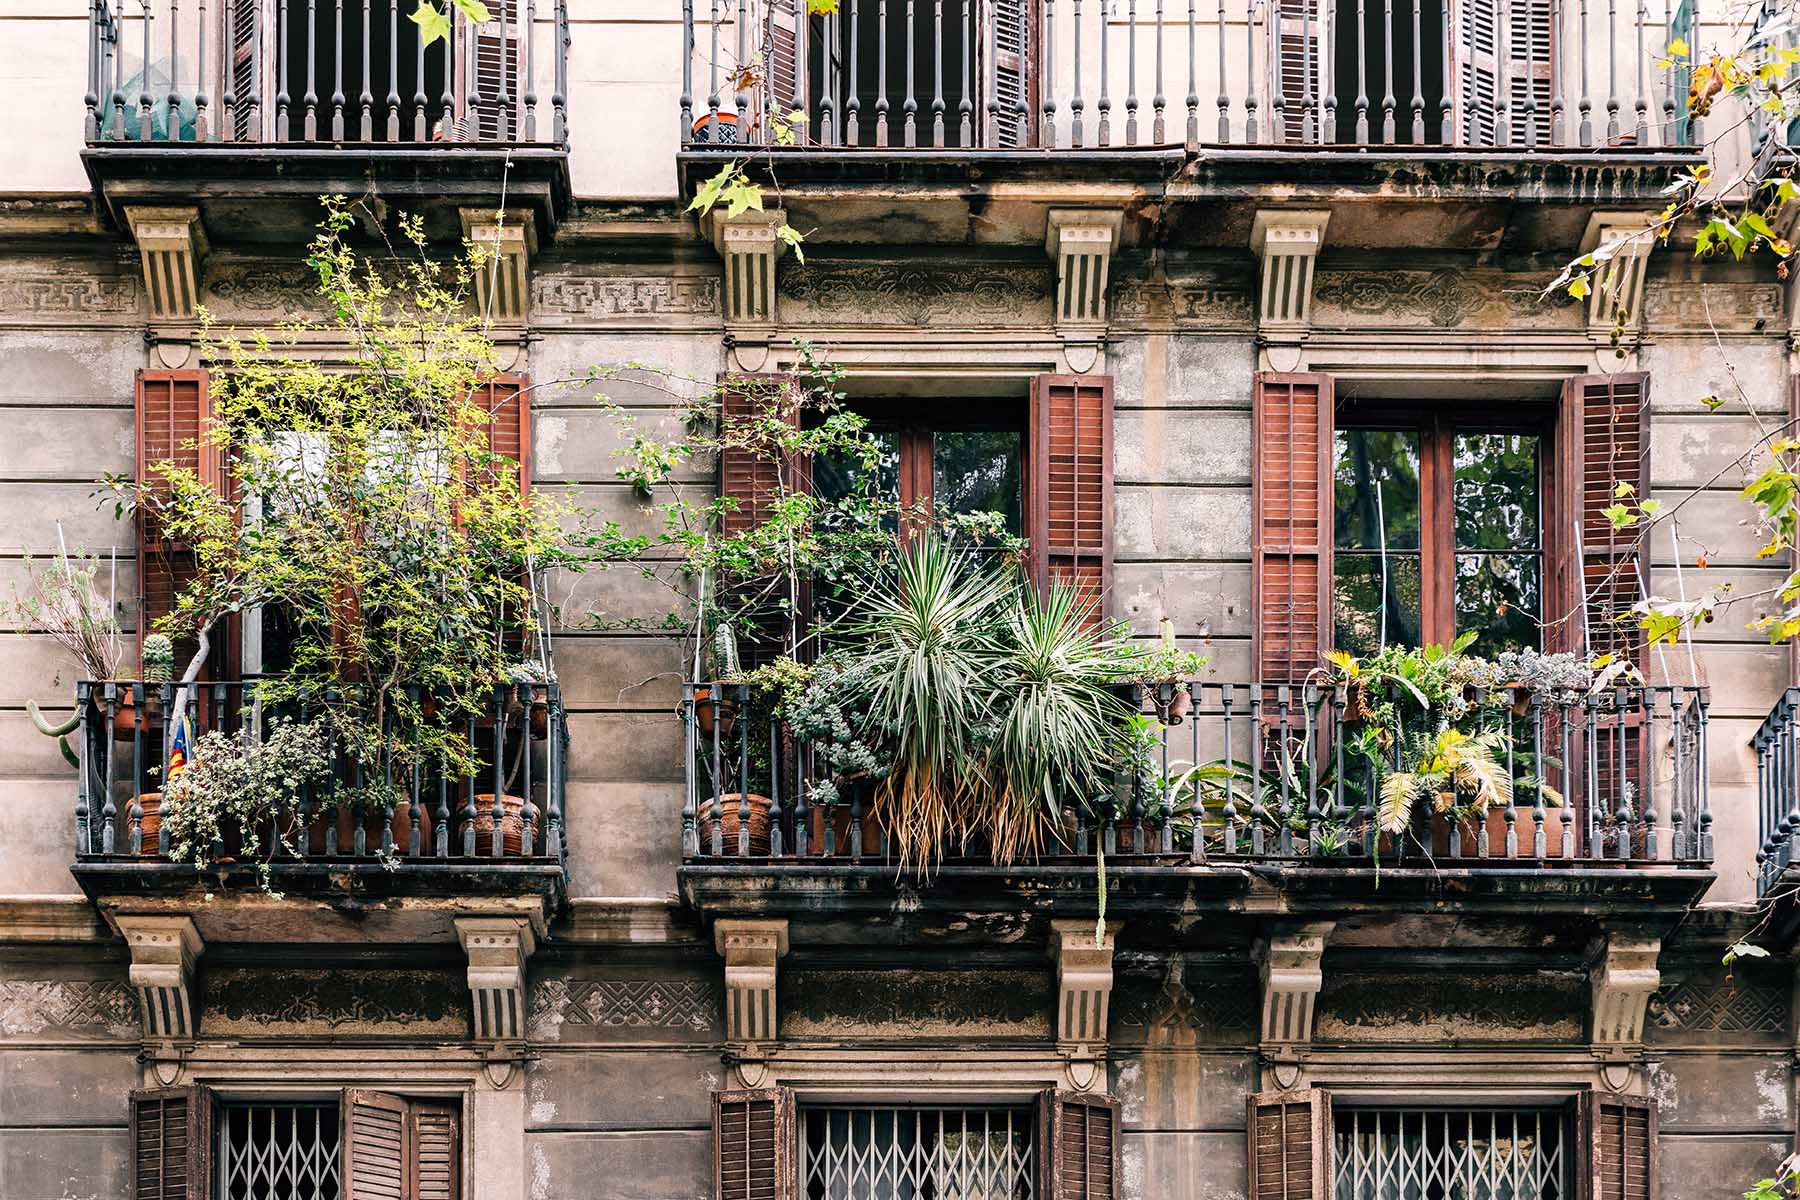 Plants adorning three balconies in Barcelona, Spain, creating an absolutely beautiful and serene feel.